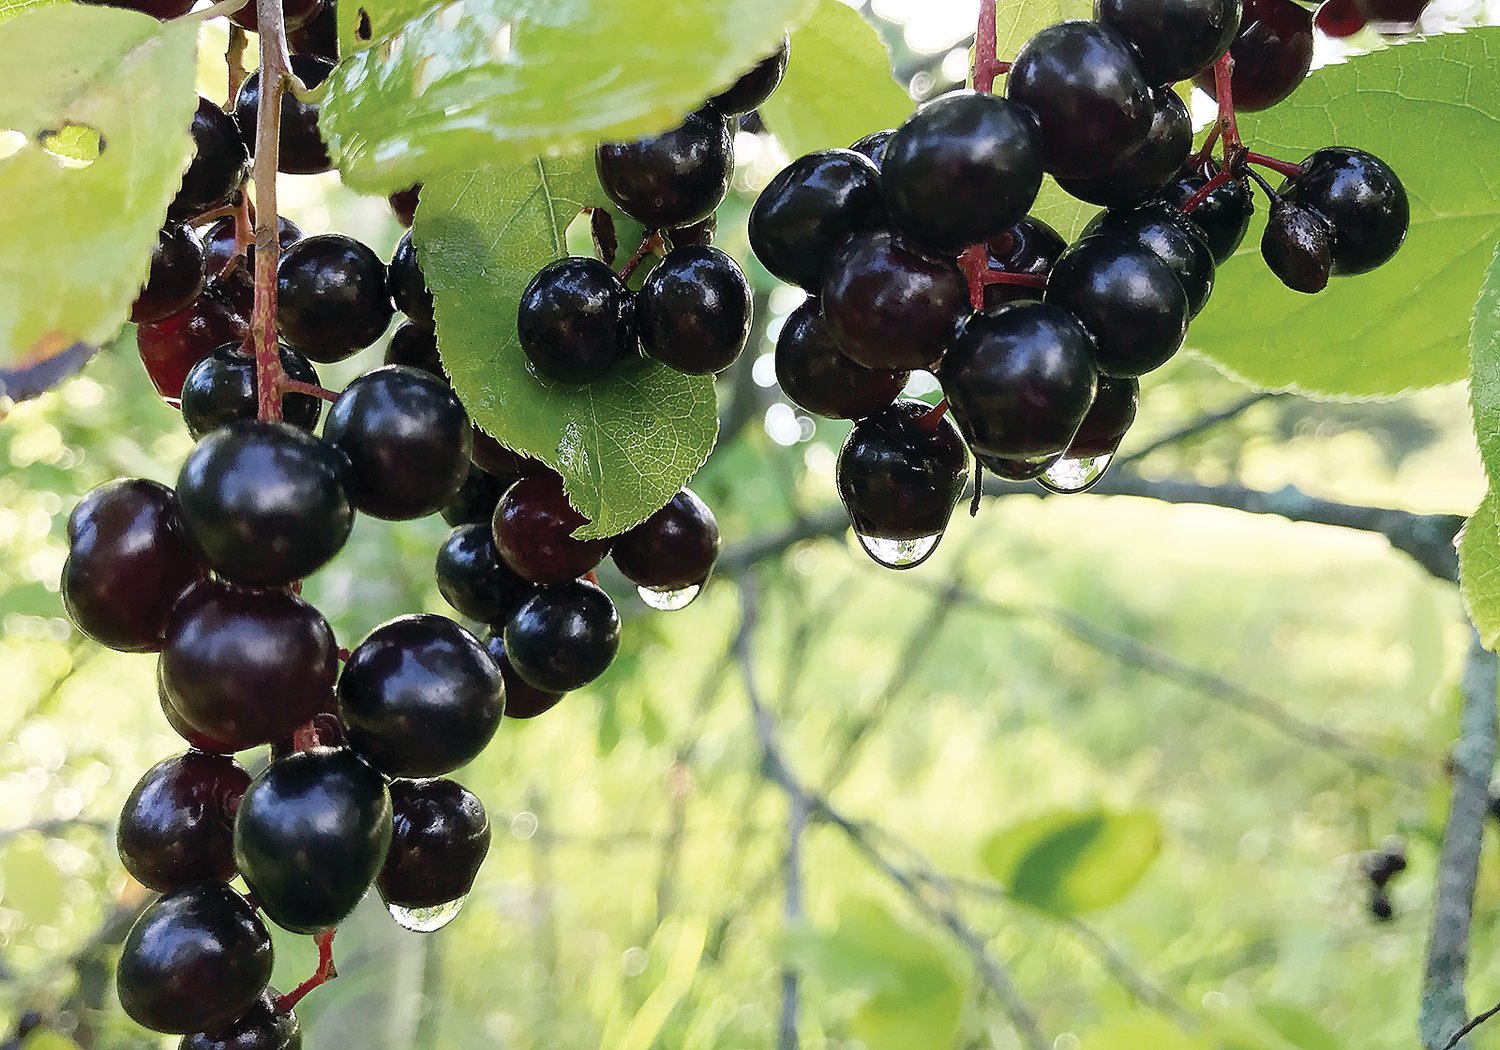 Ripe chokecherries after a recent rain.  These common 
berries make an excellent red wine.